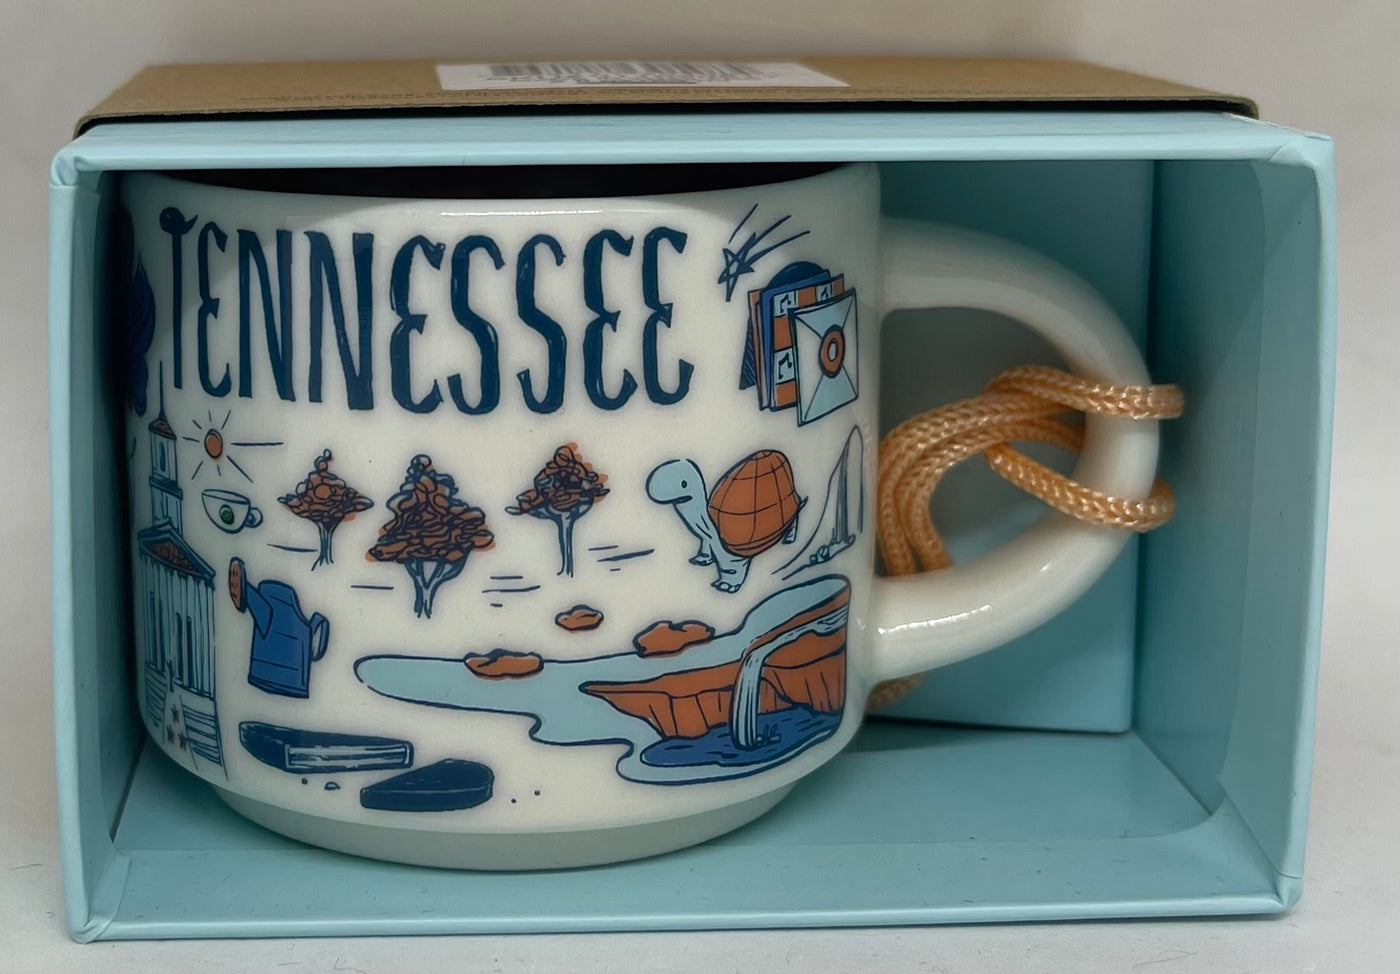 Starbucks Coffee Been There Tennessee Ceramic Mug Ornament New with Box